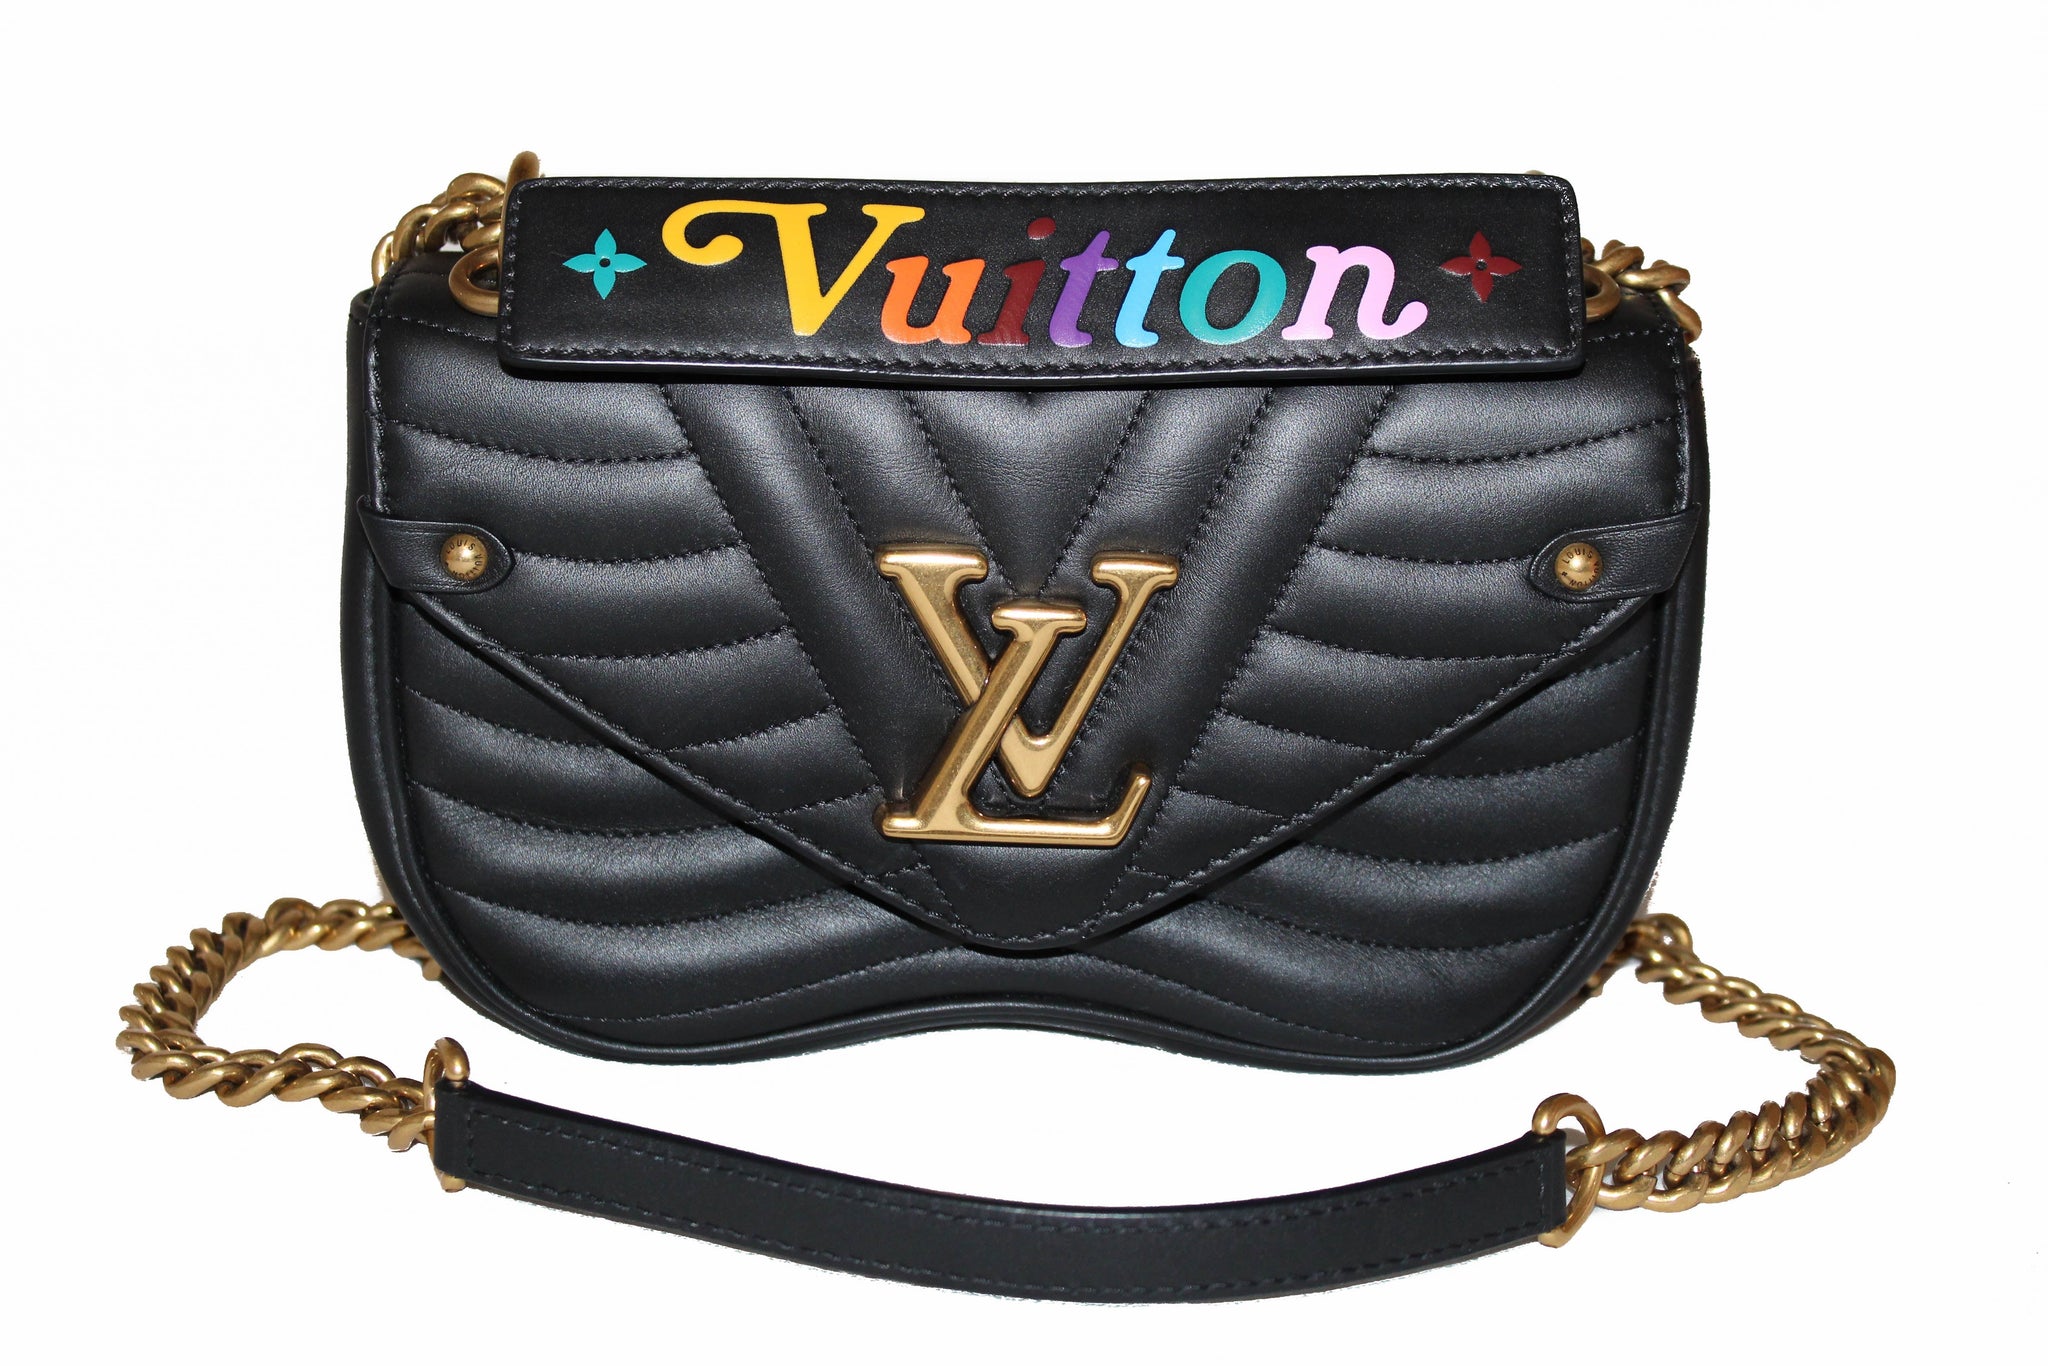 Black Louis Vuitton Cross-body Bag with Gold chain